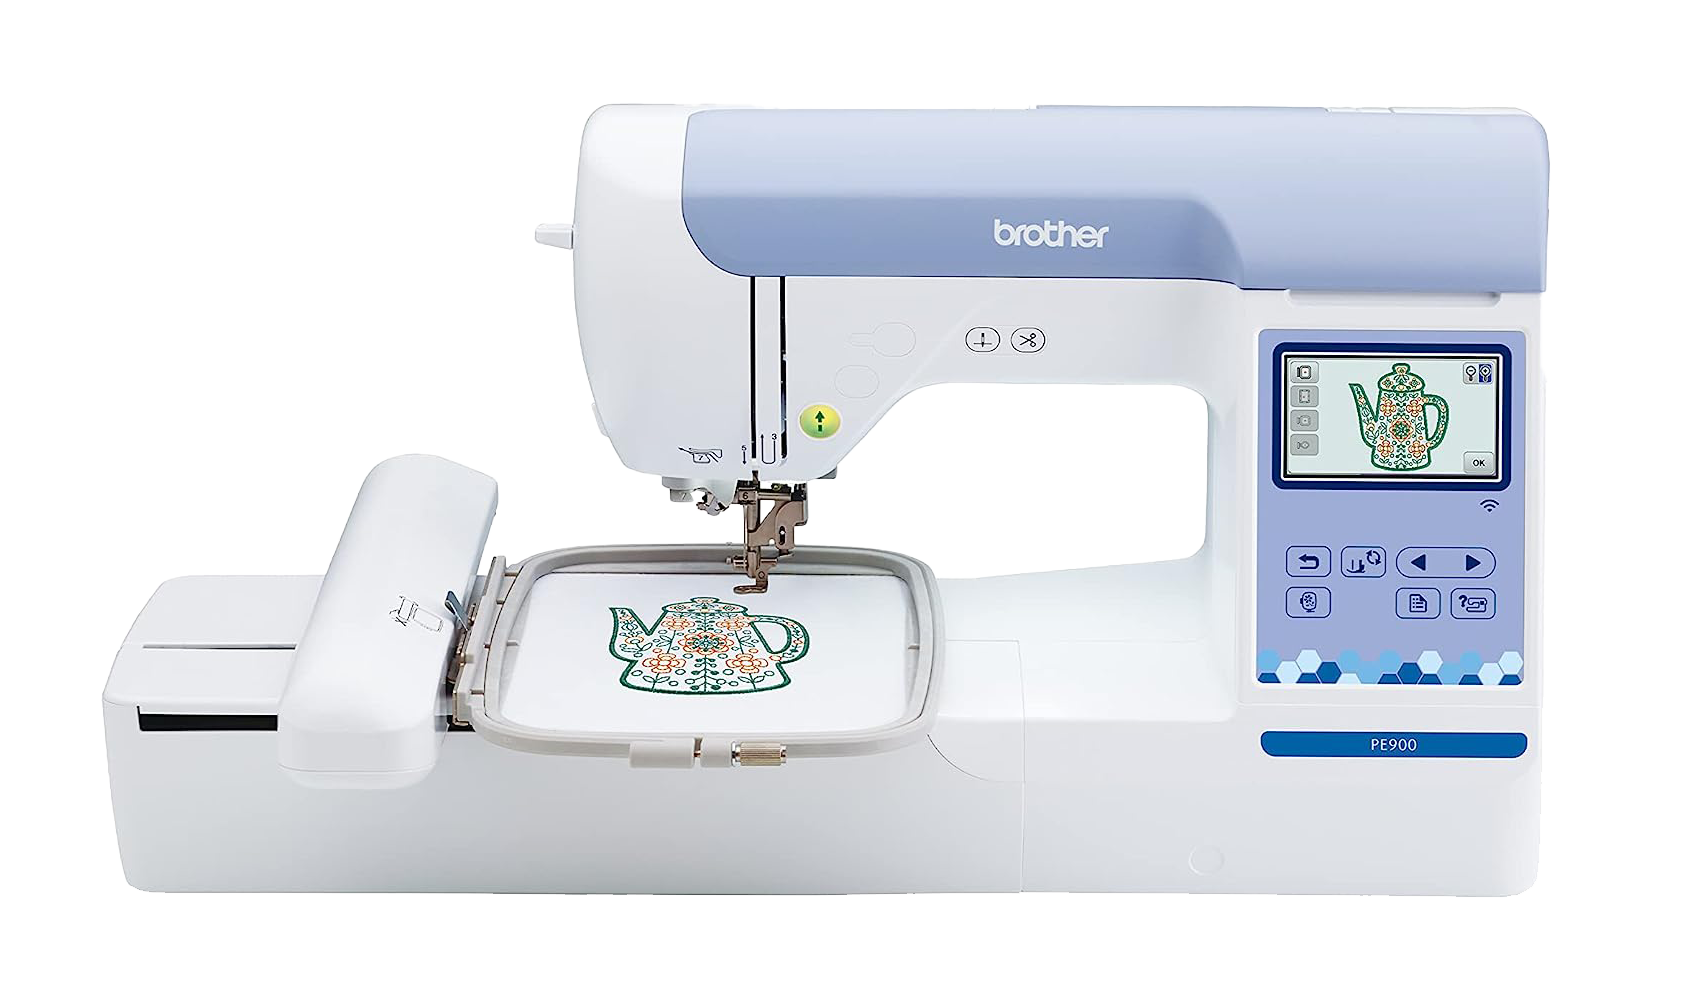 Shop the largest selection of genuine Brother accessories for your new Brother PE900 Embroidery Machine at World Weidner!